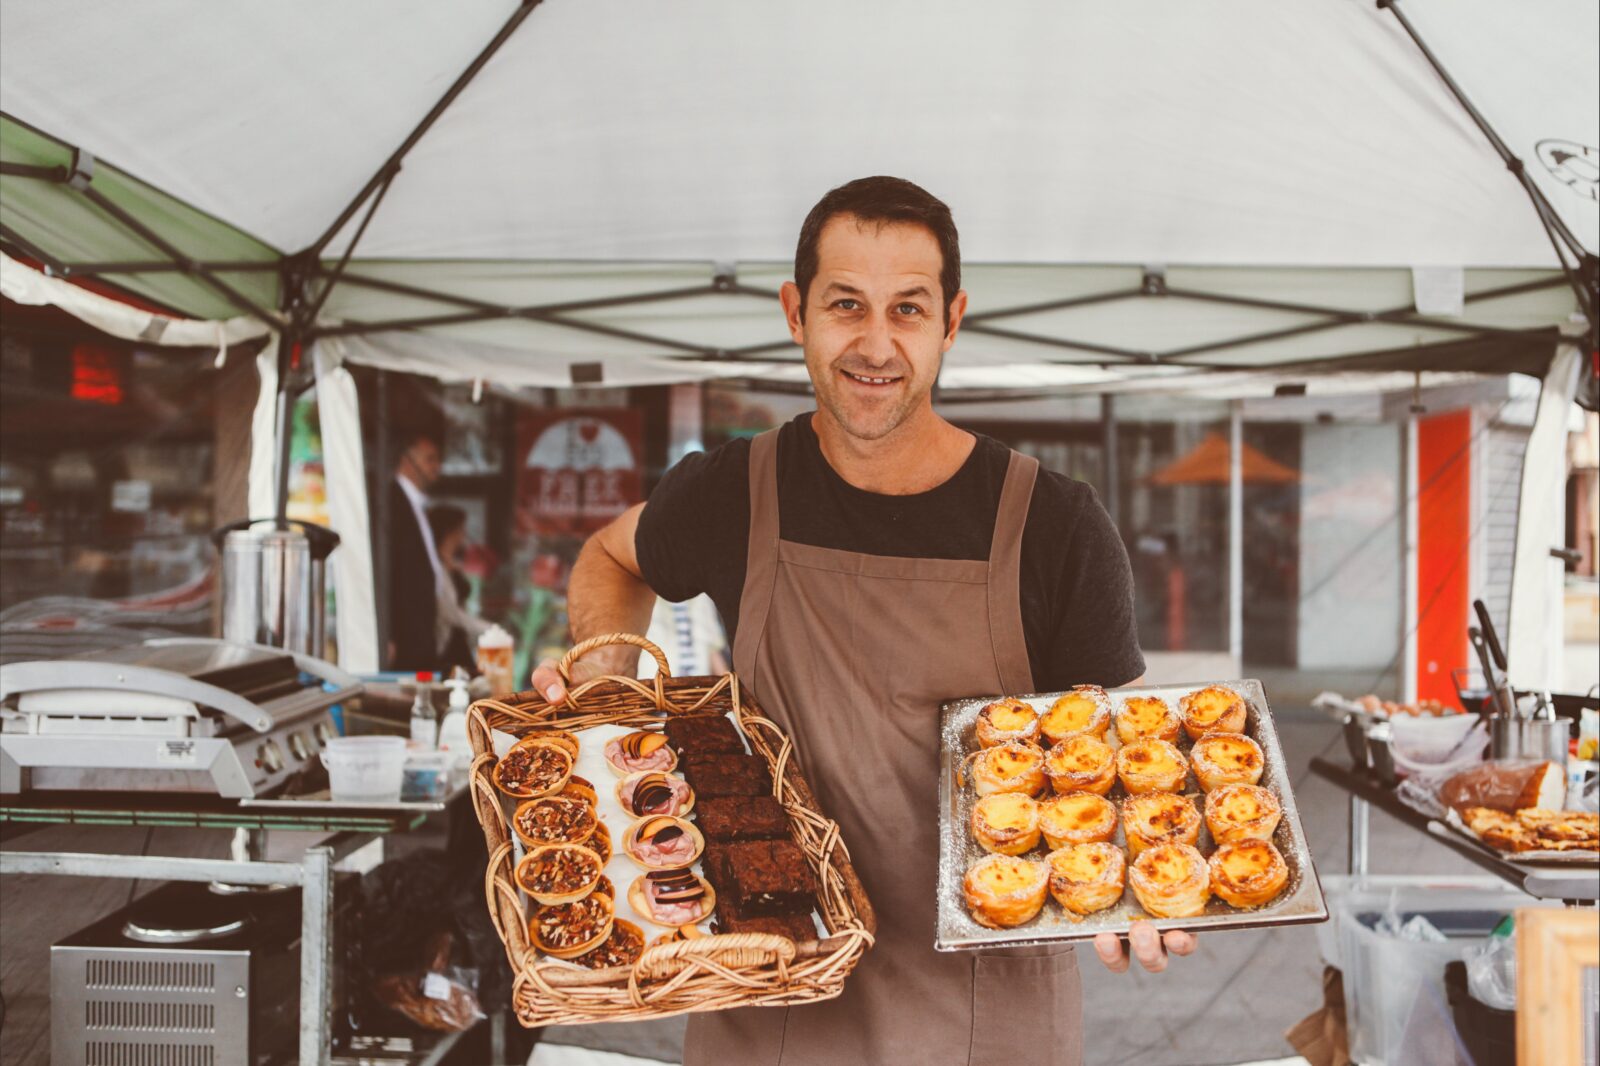 Stallholder from Courtney's Brasserie holding trays of cakes and tarts